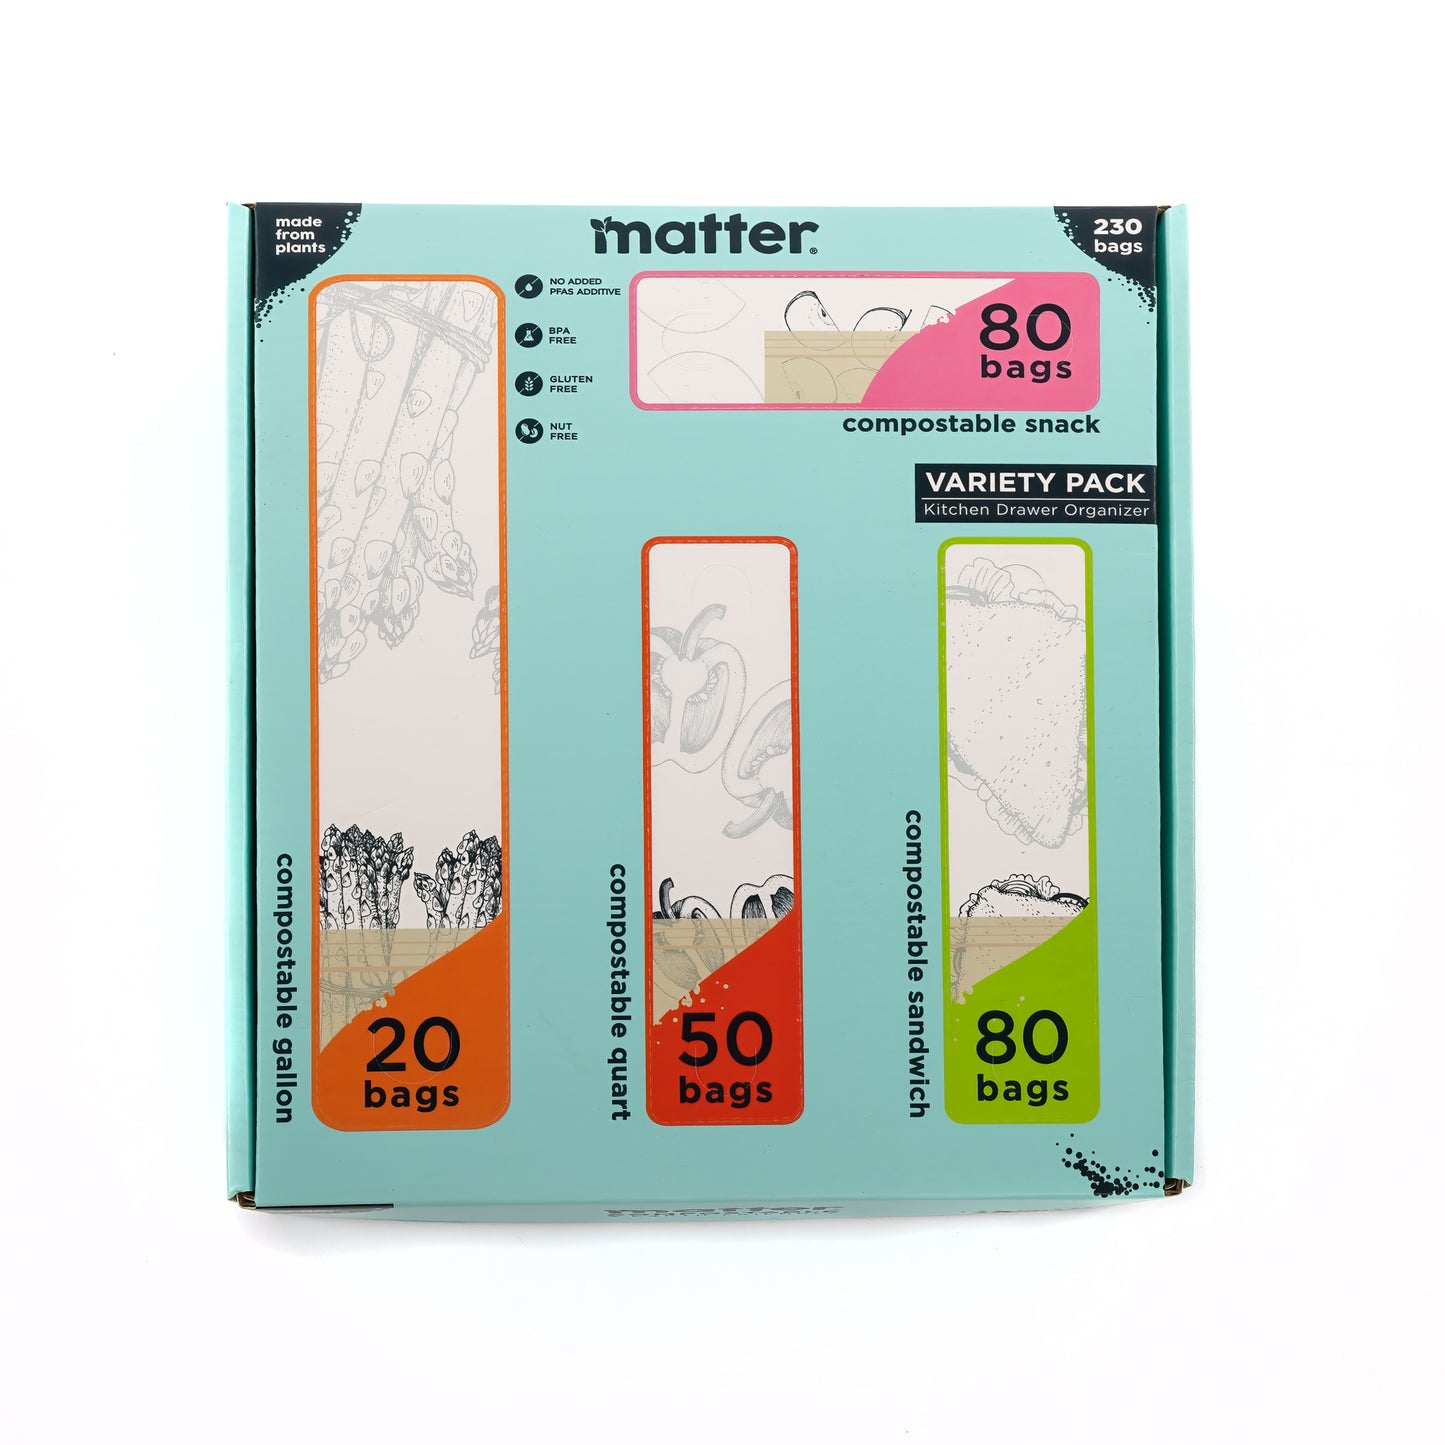 Matter Compostable Kitchen Assorted Food Storage Bags Variety Pack - 230 Count